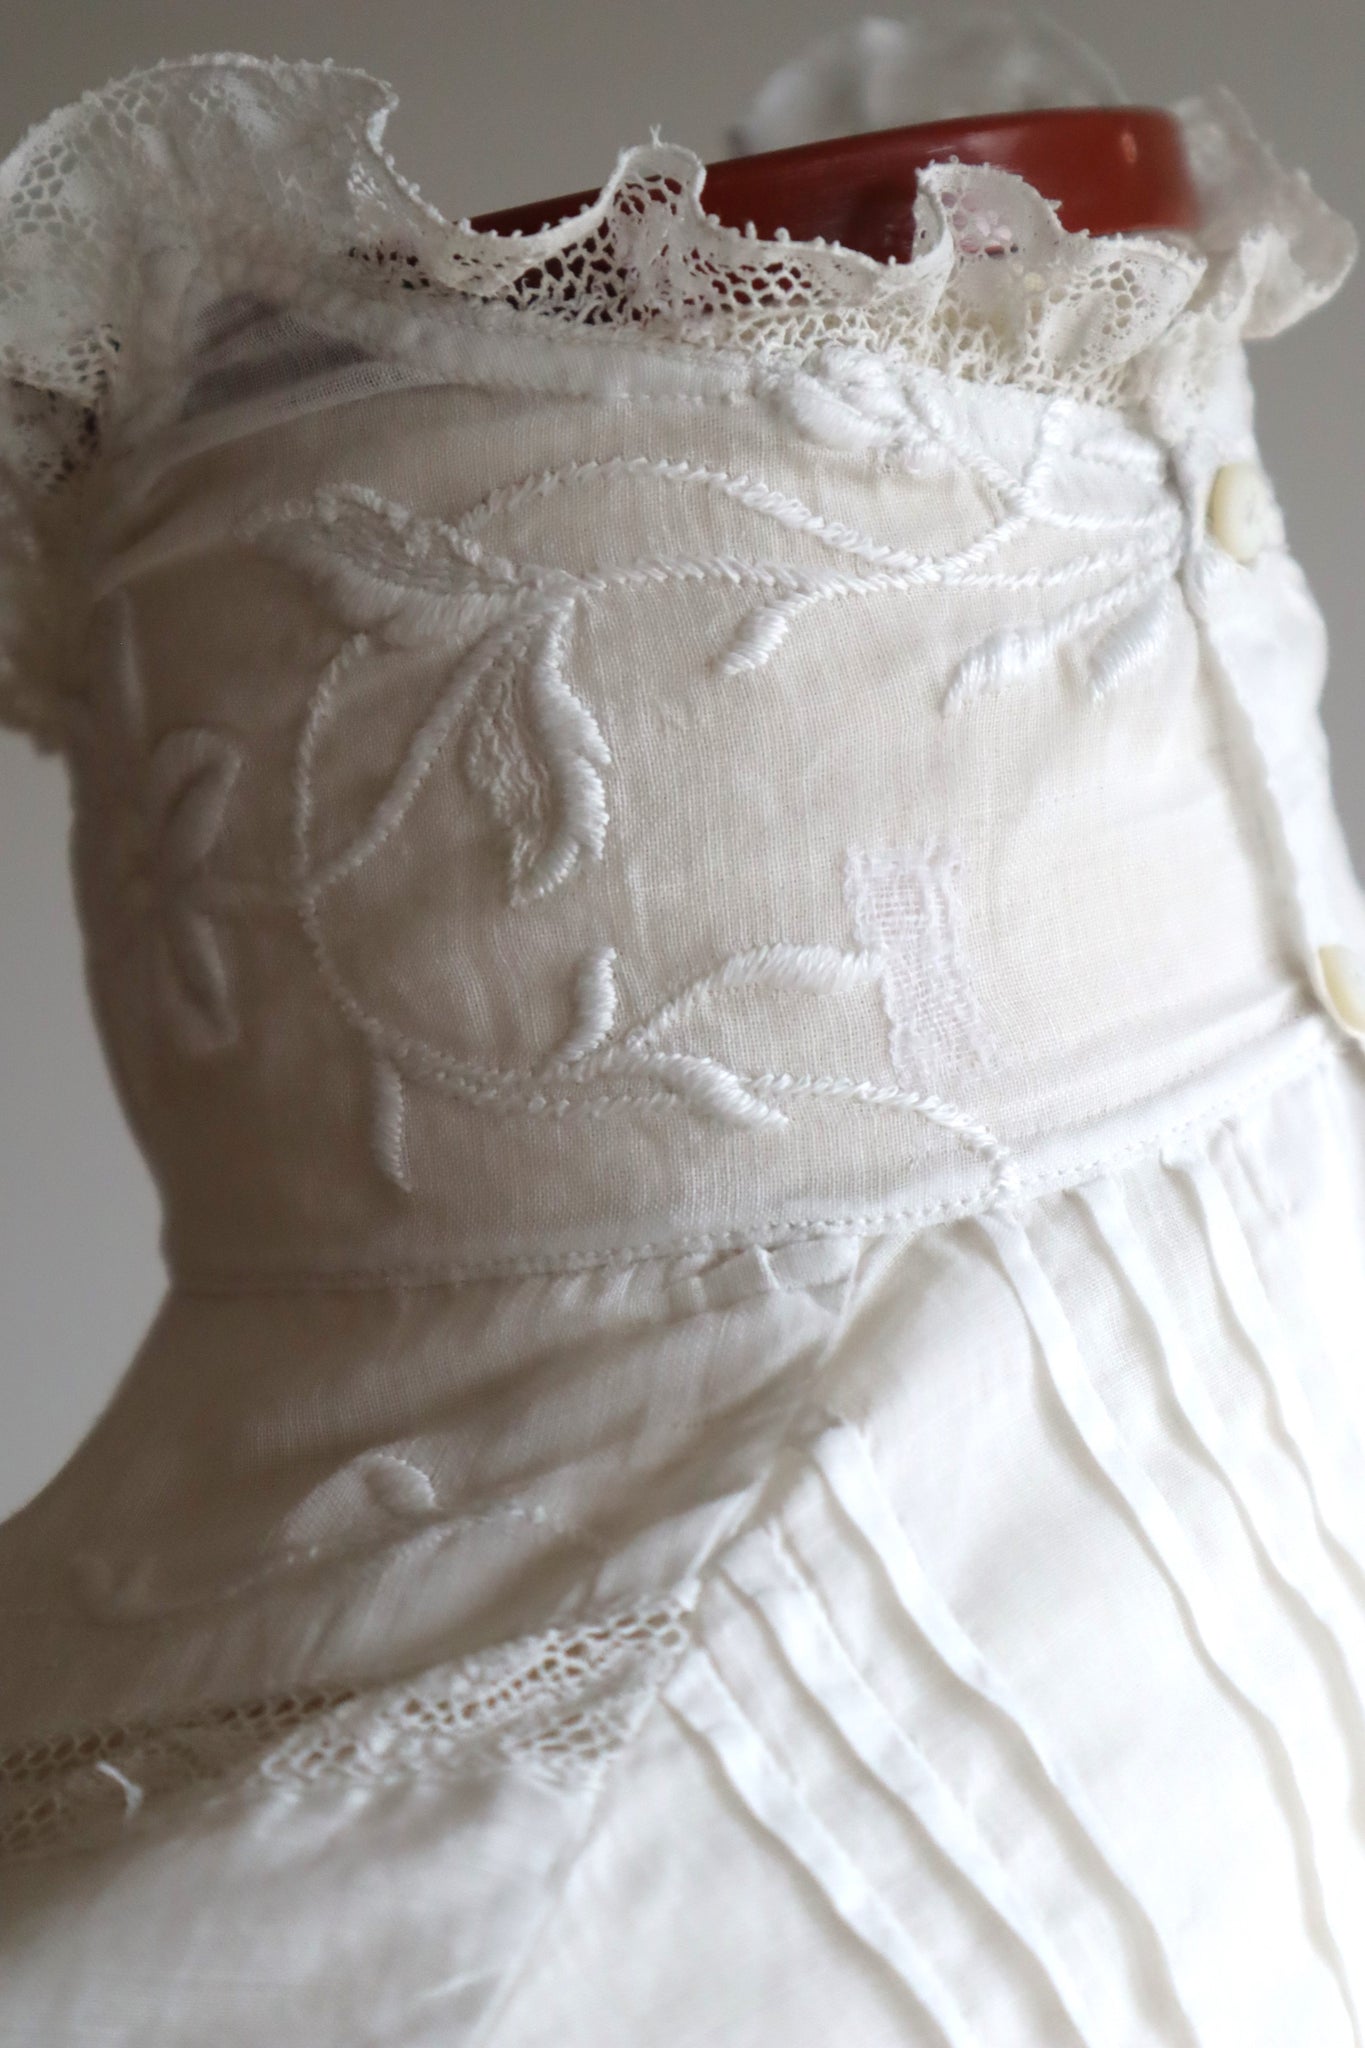 1900s Edwardian Muslin Cotton Embroidered Blouse